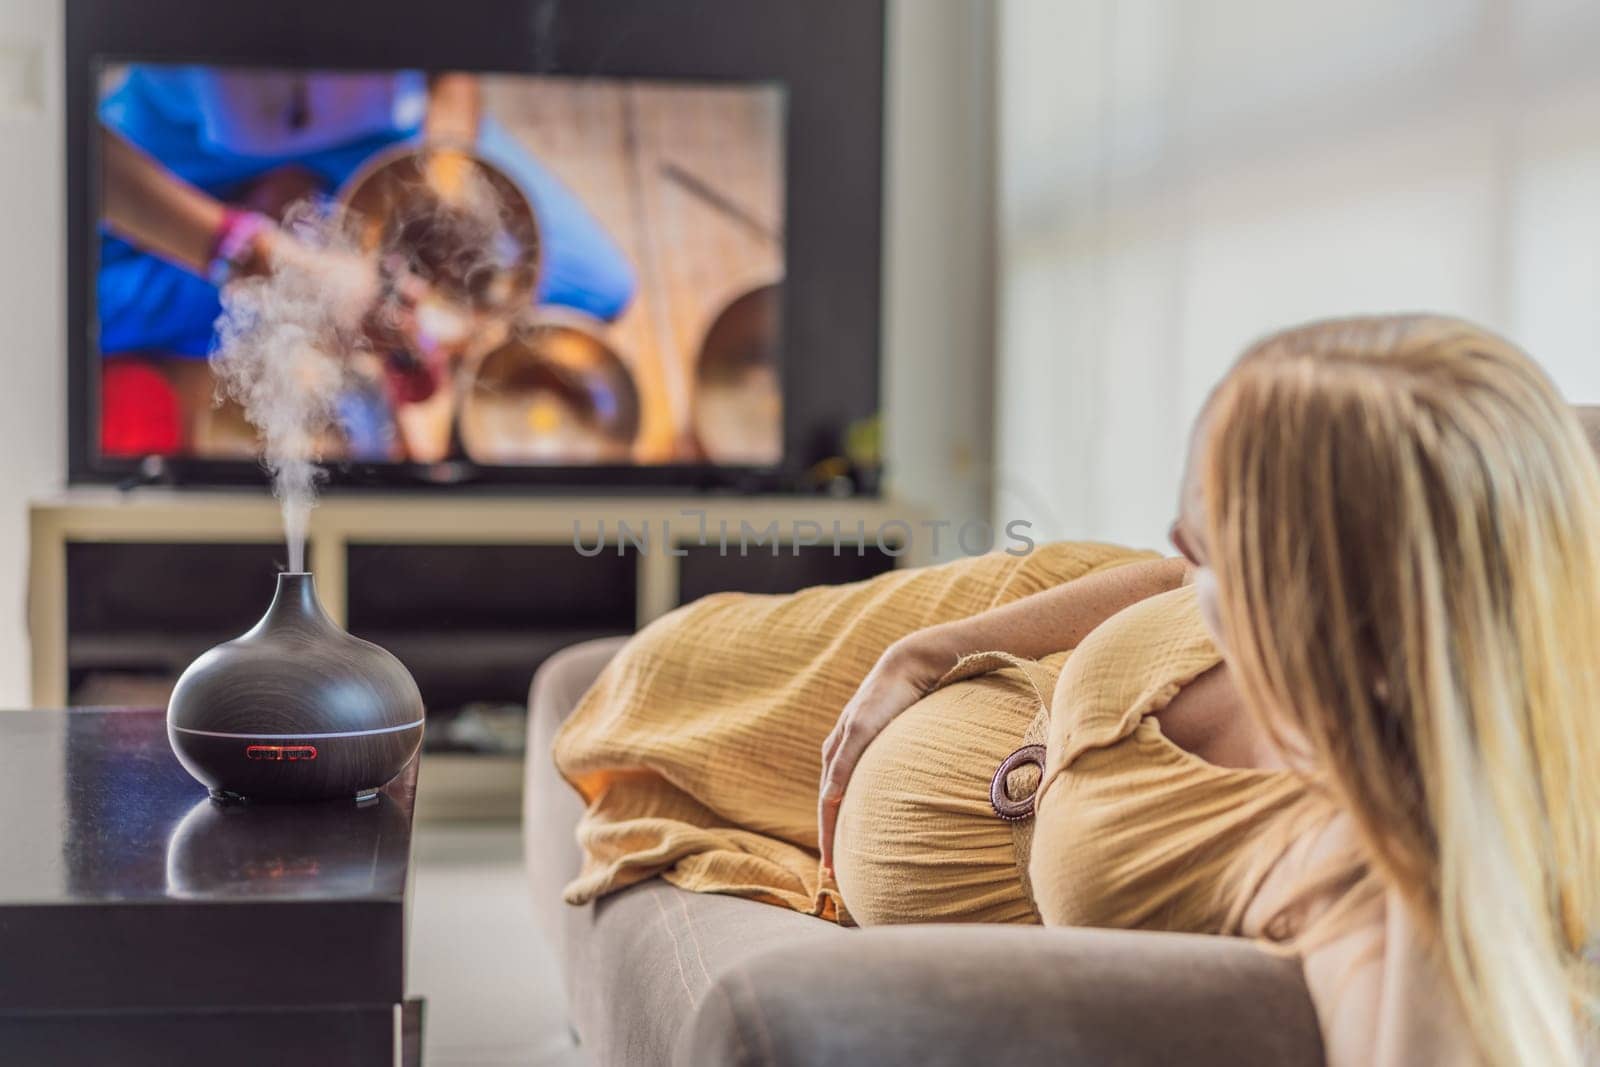 A blissful pregnant woman immerses in relaxation, savoring the soothing aroma from a diffuser while indulging in a calming TV video, embracing tranquility during her pregnant journey by galitskaya